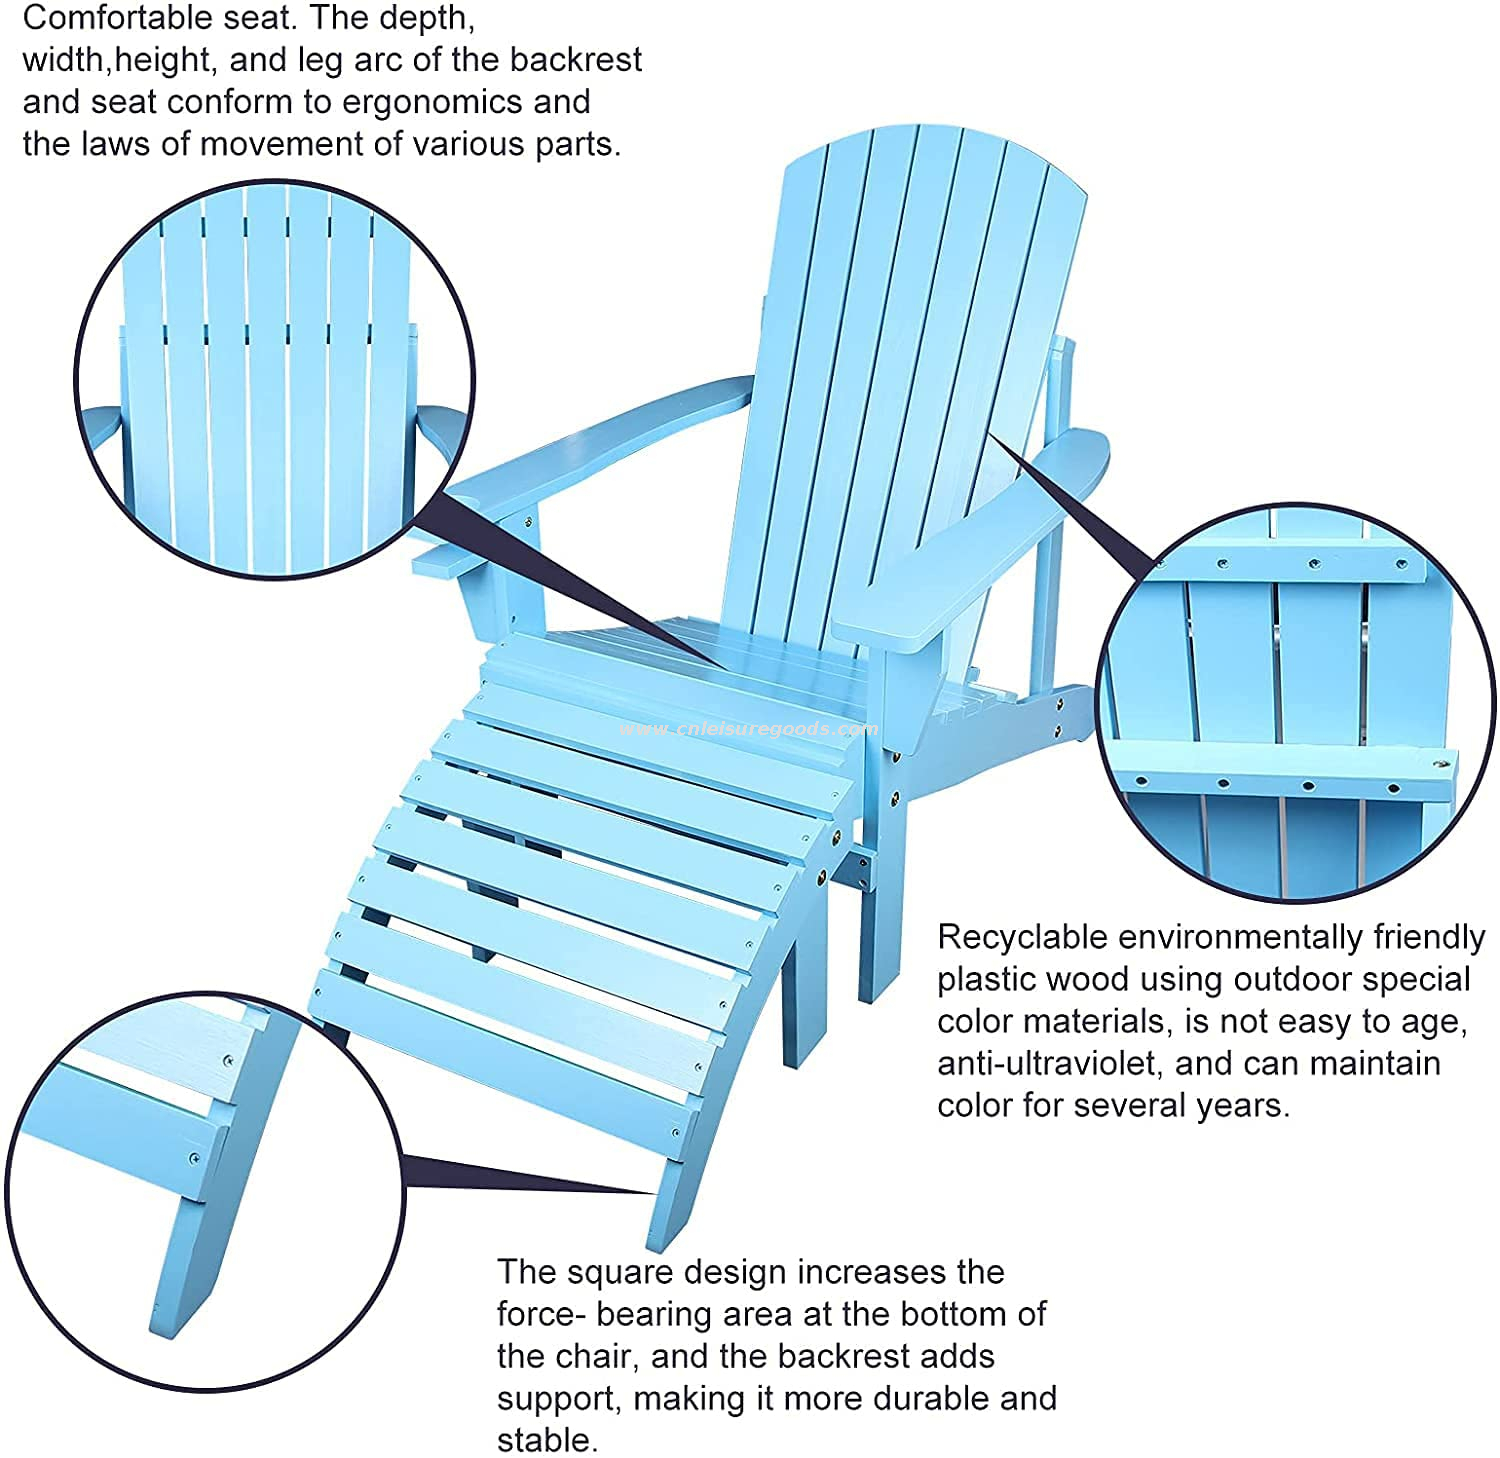 Uplion Kd Weather Resistant For Patio Deck Garden, Backyard & Lawn Furniture Easy Maintenance & Classic Adirondack Chair